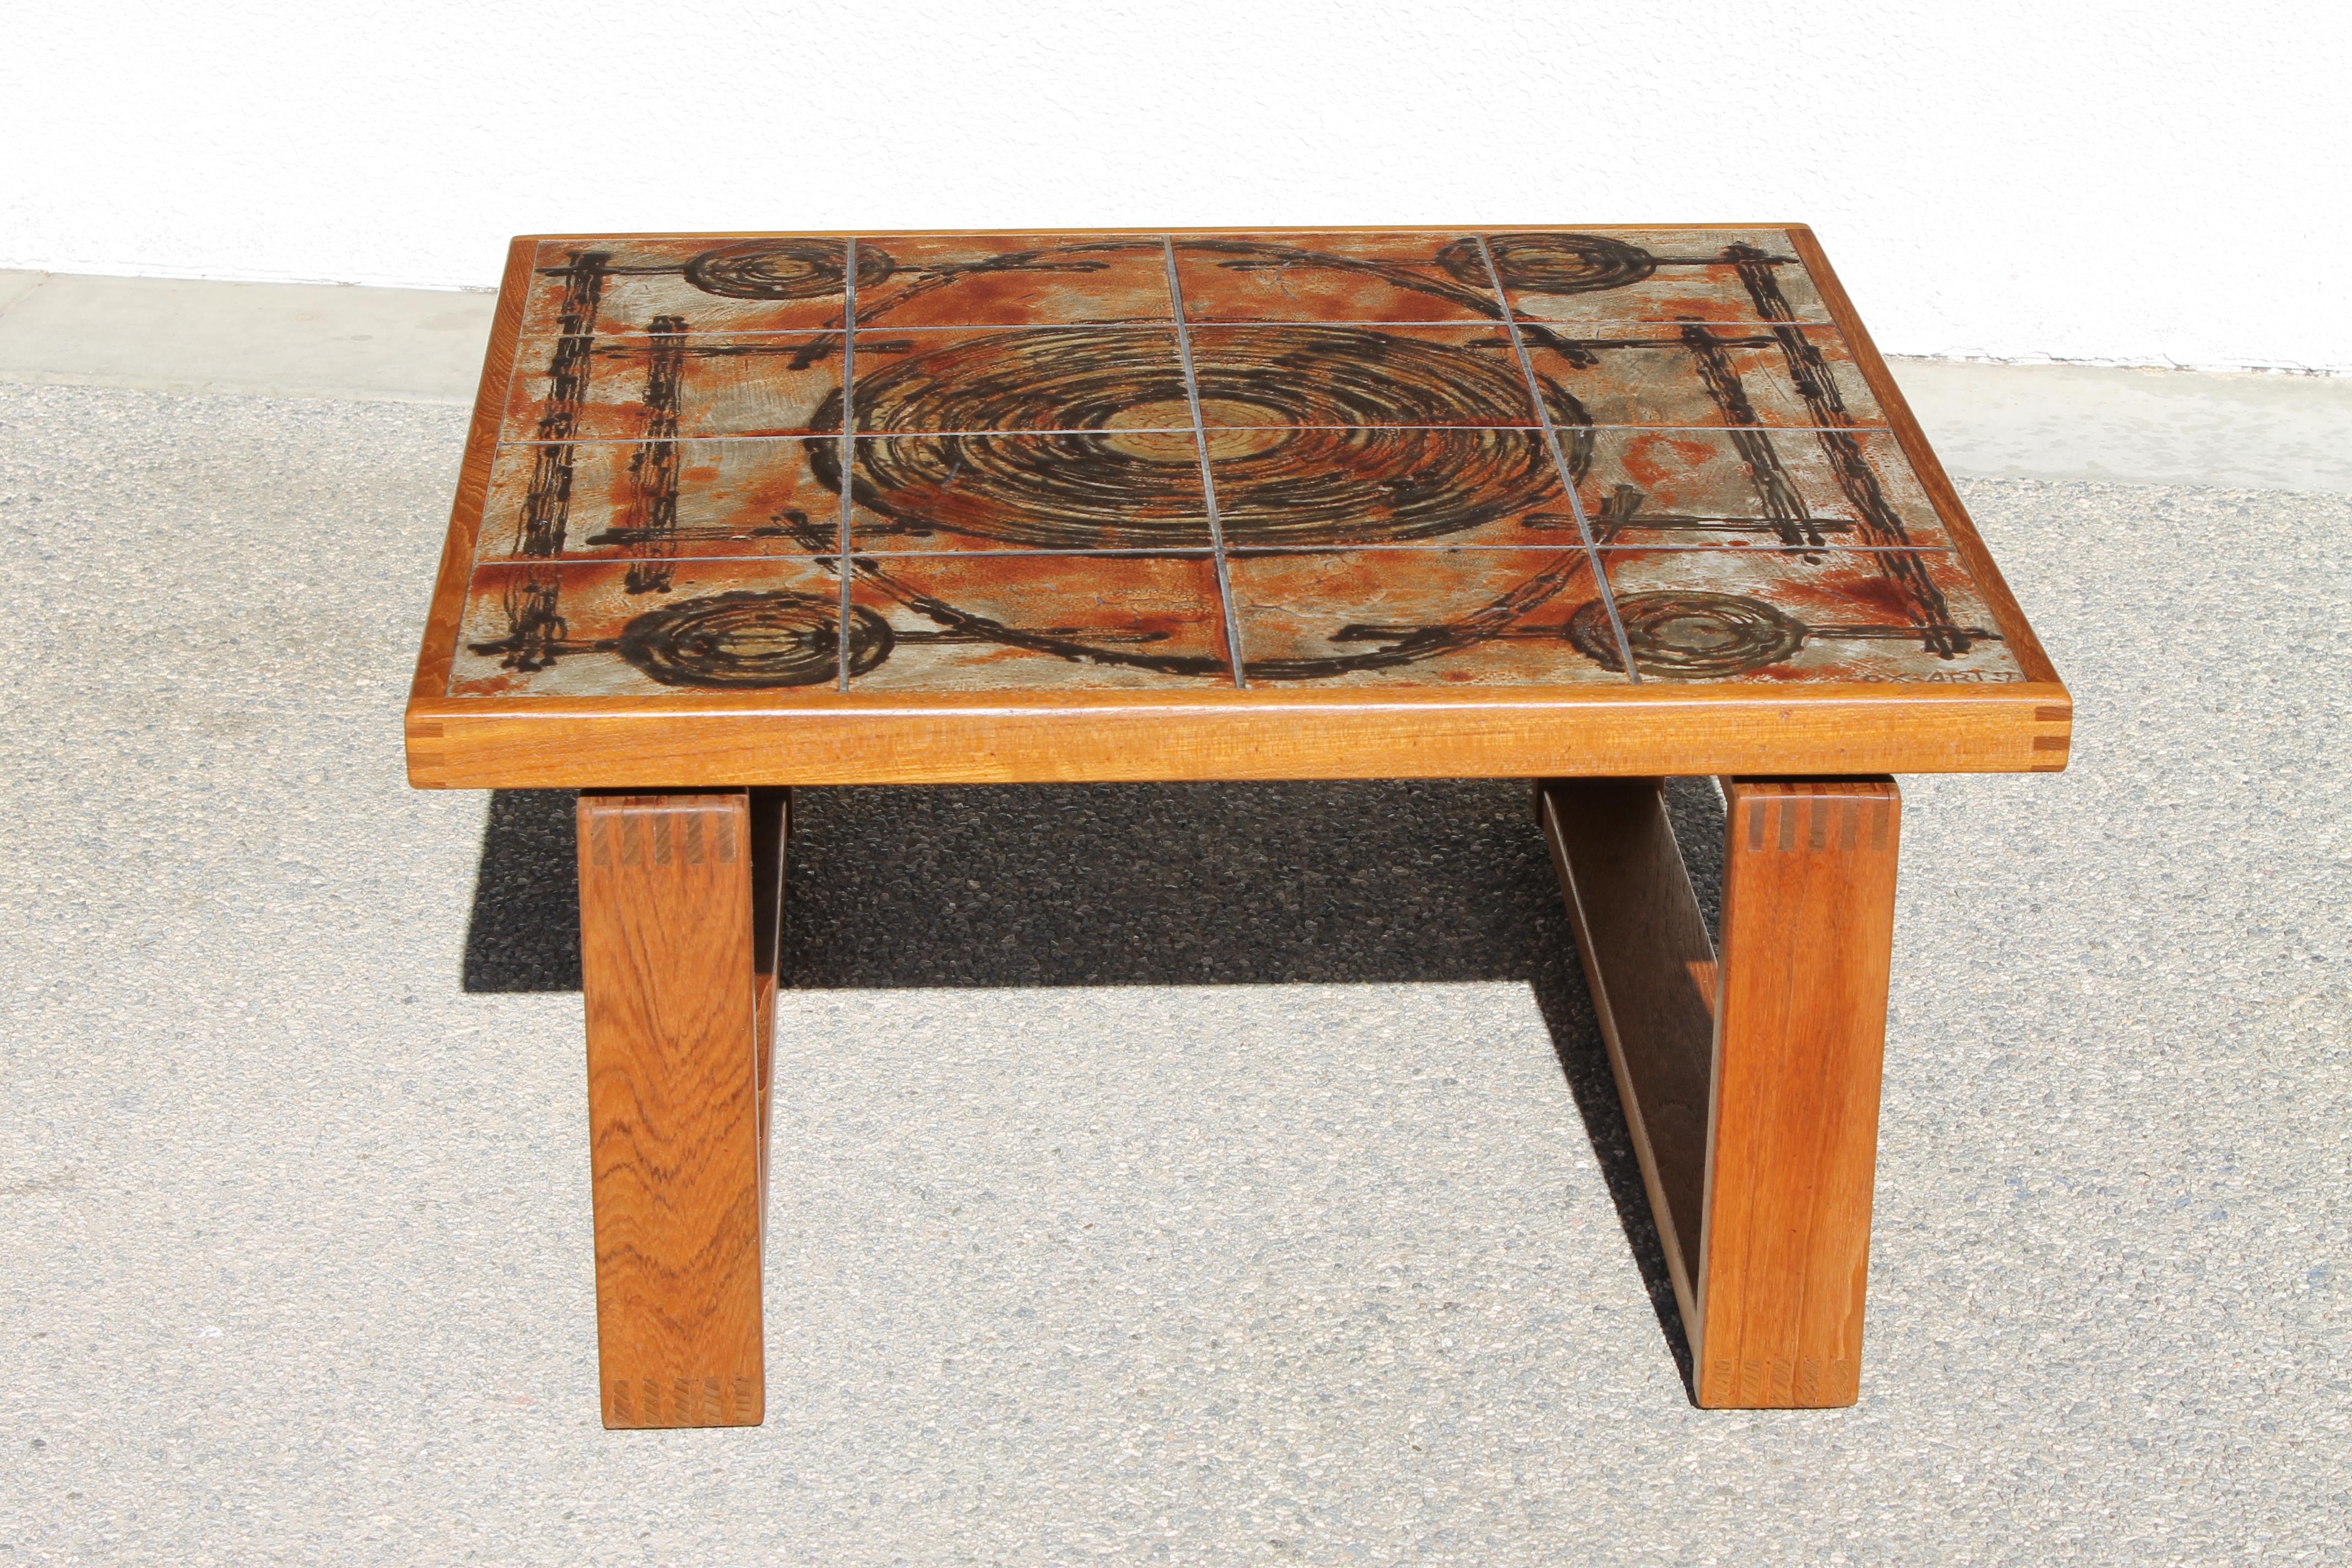 Ceramic and teak coffee table by Ox Art and dated 73. Table is square shaped and measures 33.5